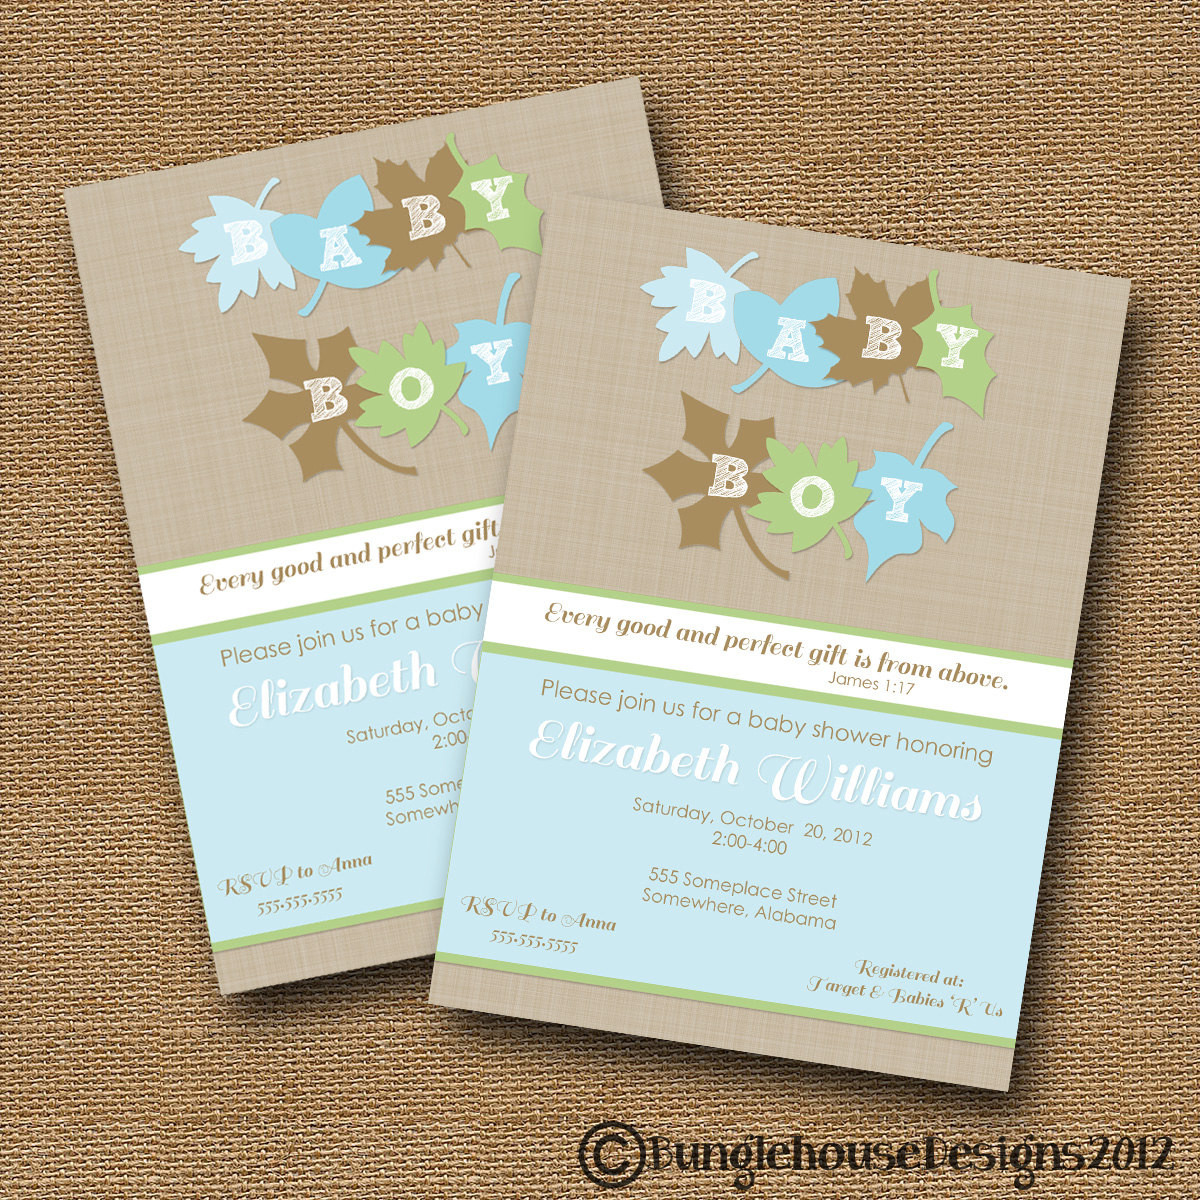 DIY Invitations Baby Shower
 Fall Leaves Baby Shower Invitation DIY by bunglehousedesigns